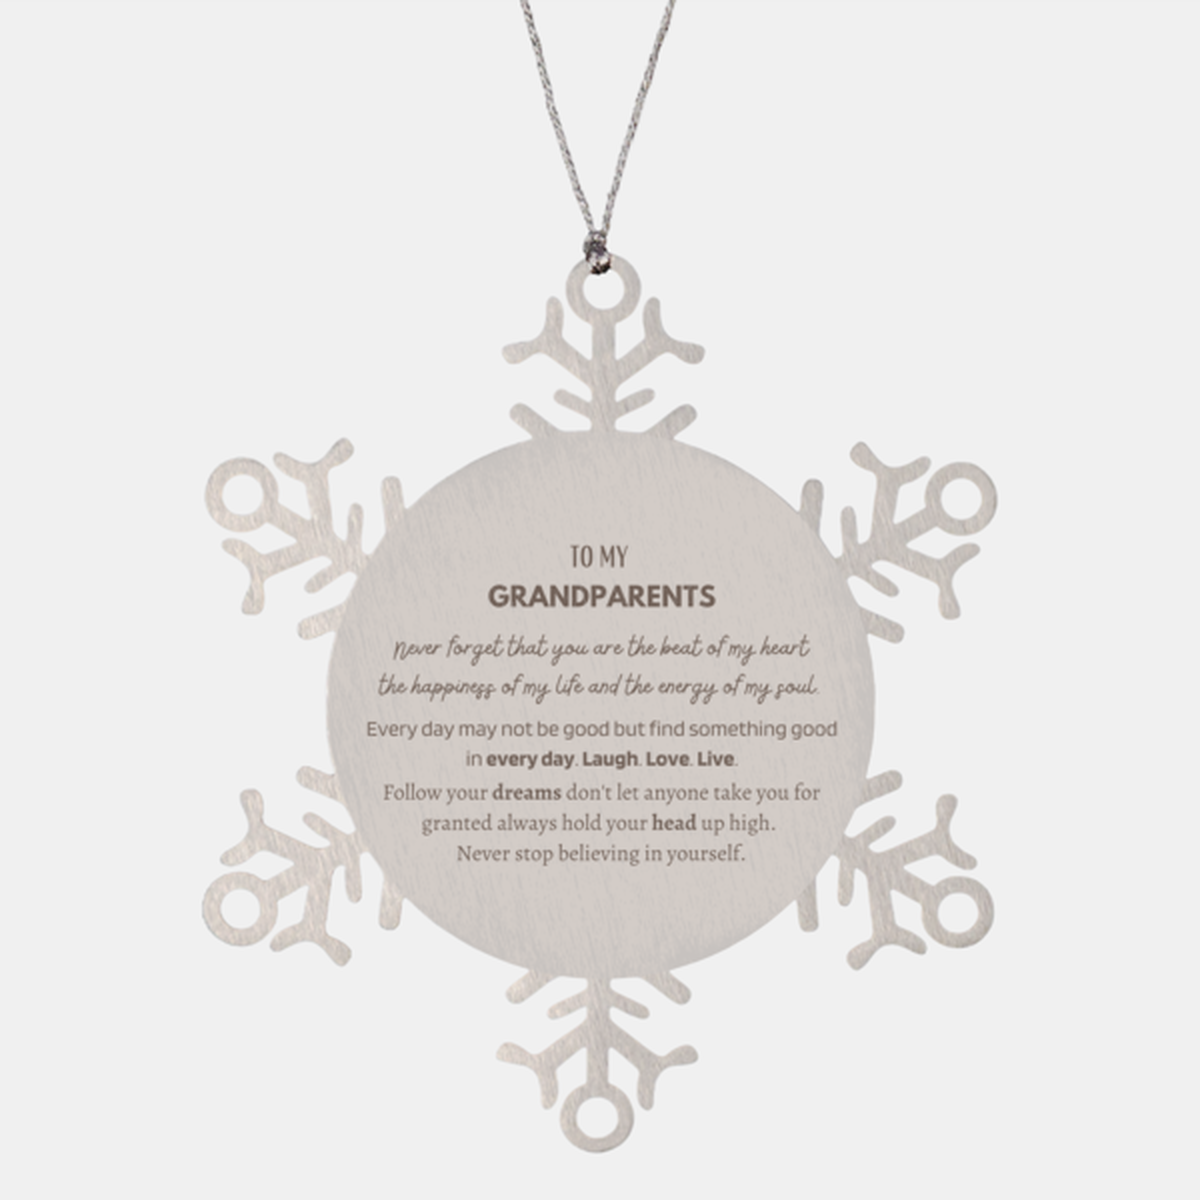 To My Grandparents Ornament Gifts, Christmas Grandparents Snowflake Ornament Present, Christmas Unique Motivational For Grandparents, To My Grandparents Never forget that you are the beat of my heart the happiness of my life and the energy of my soul